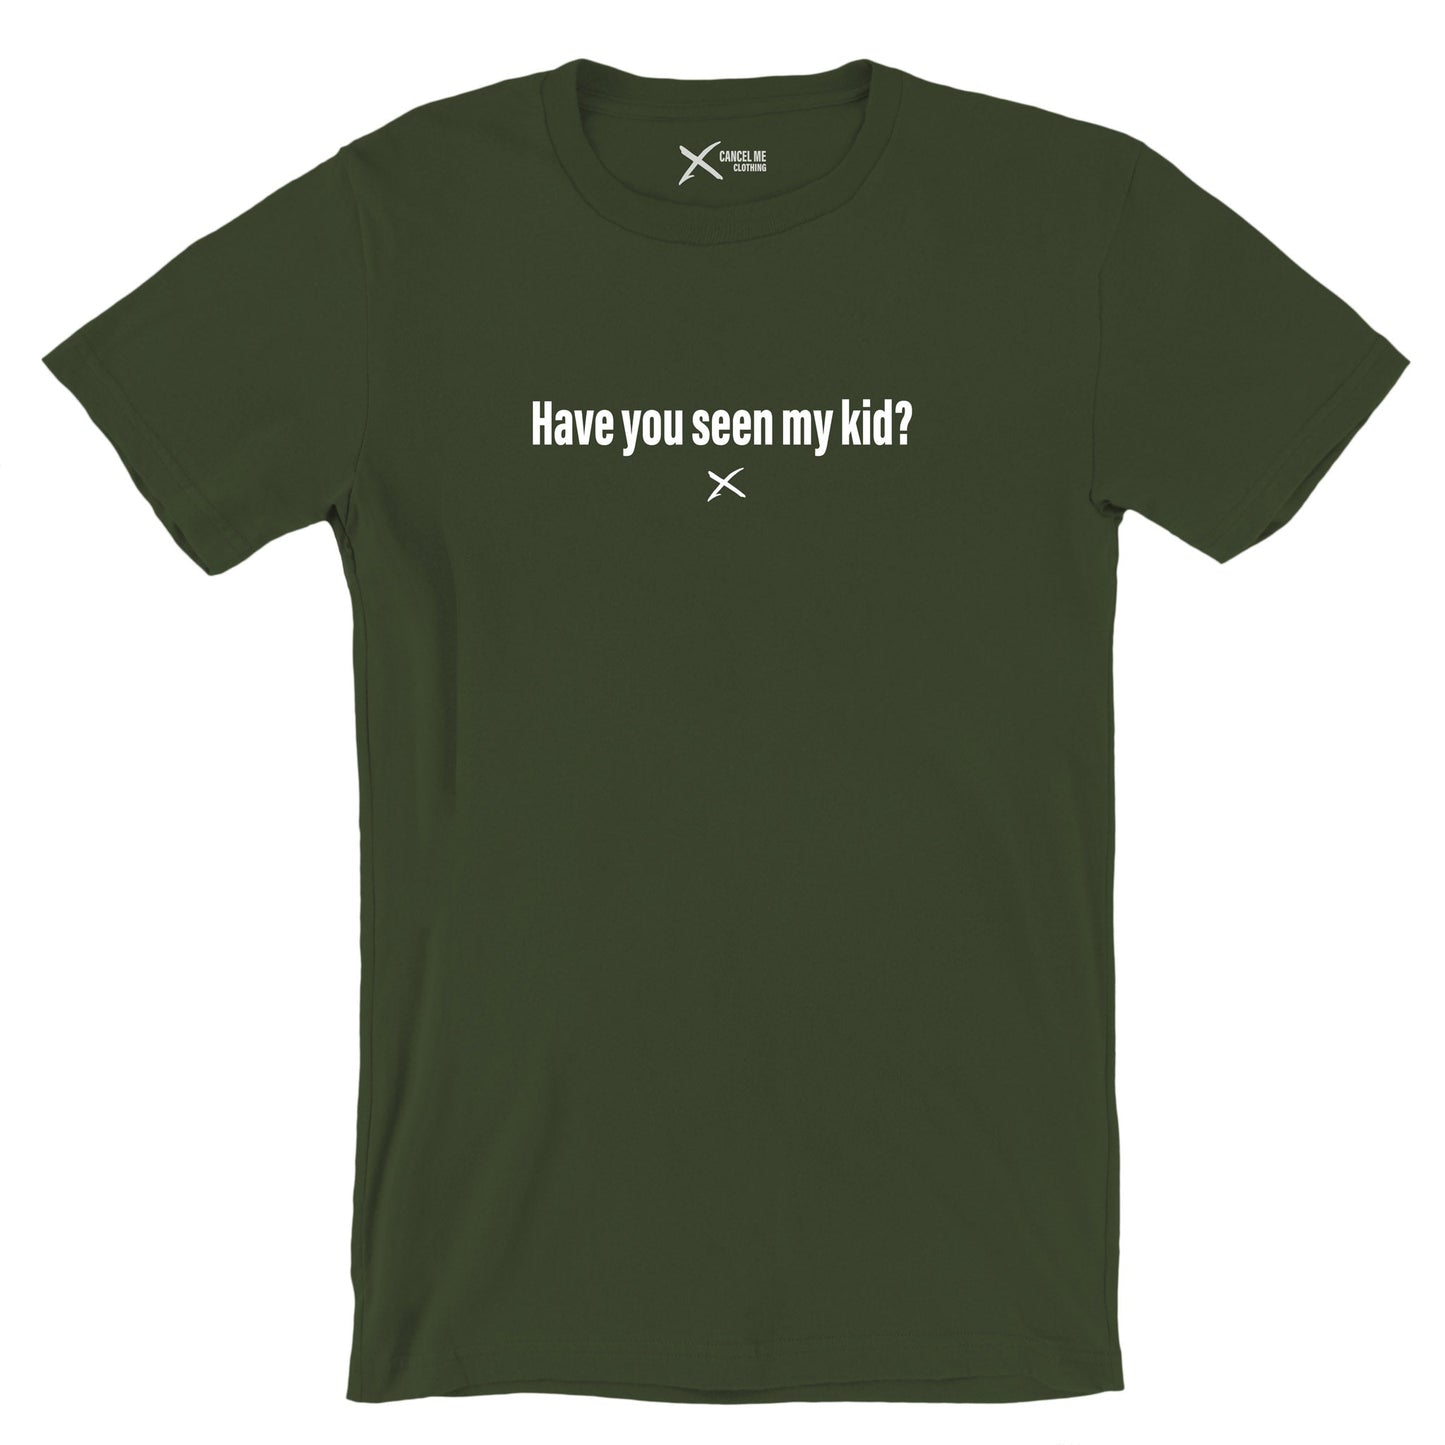 Have you seen my kid? - Shirt